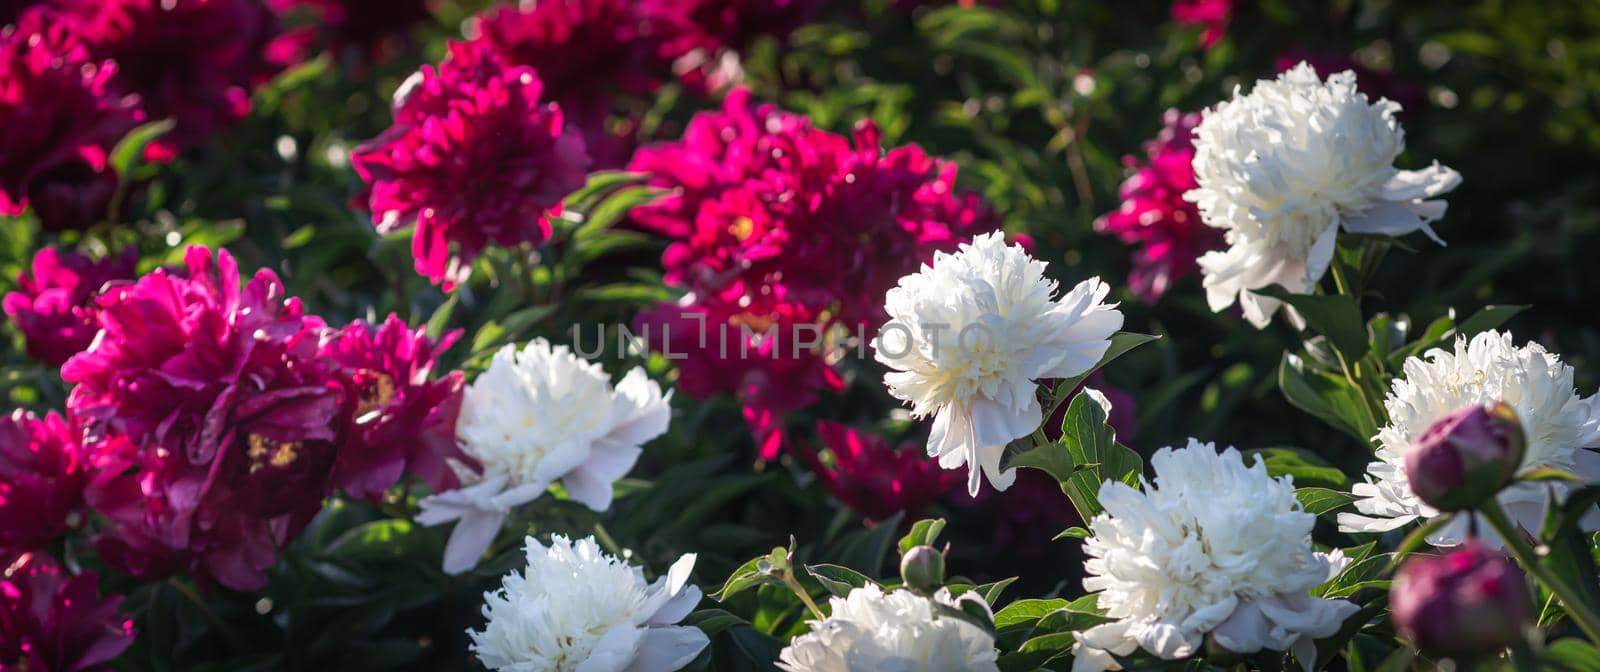 White and pink peonies in the garden by palinchak